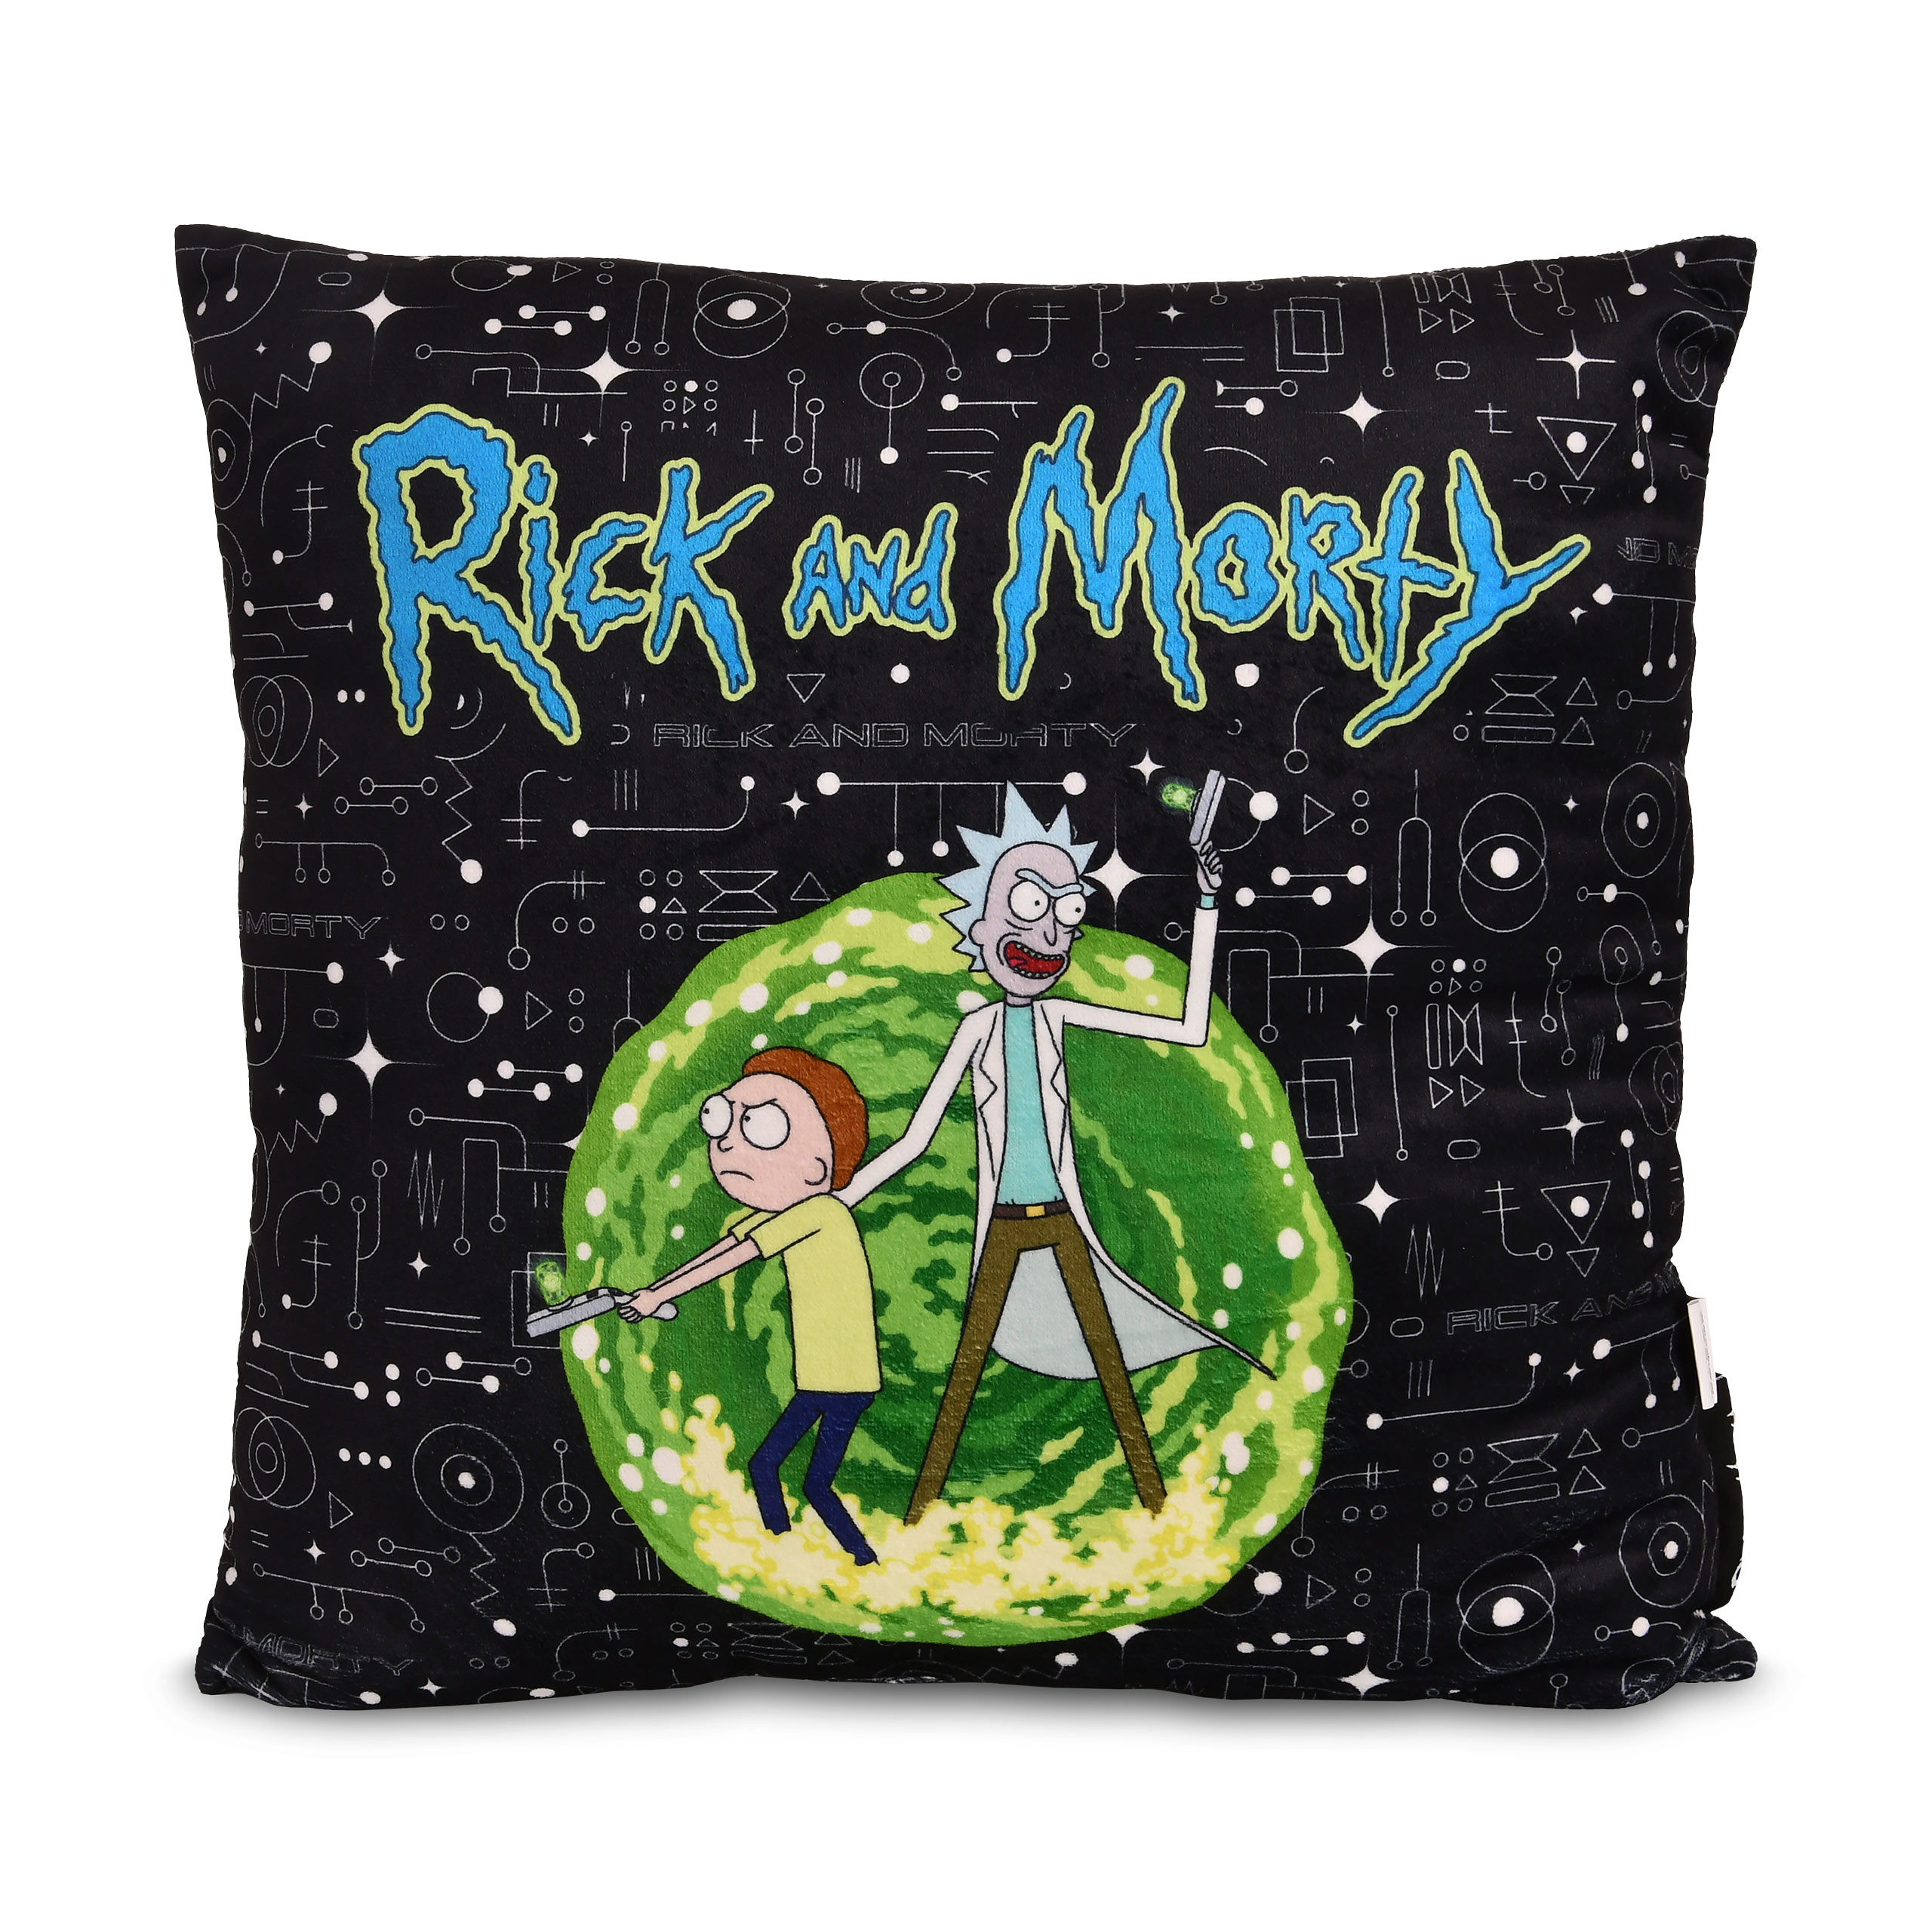 Rick and Morty - Portal and Science Pillow